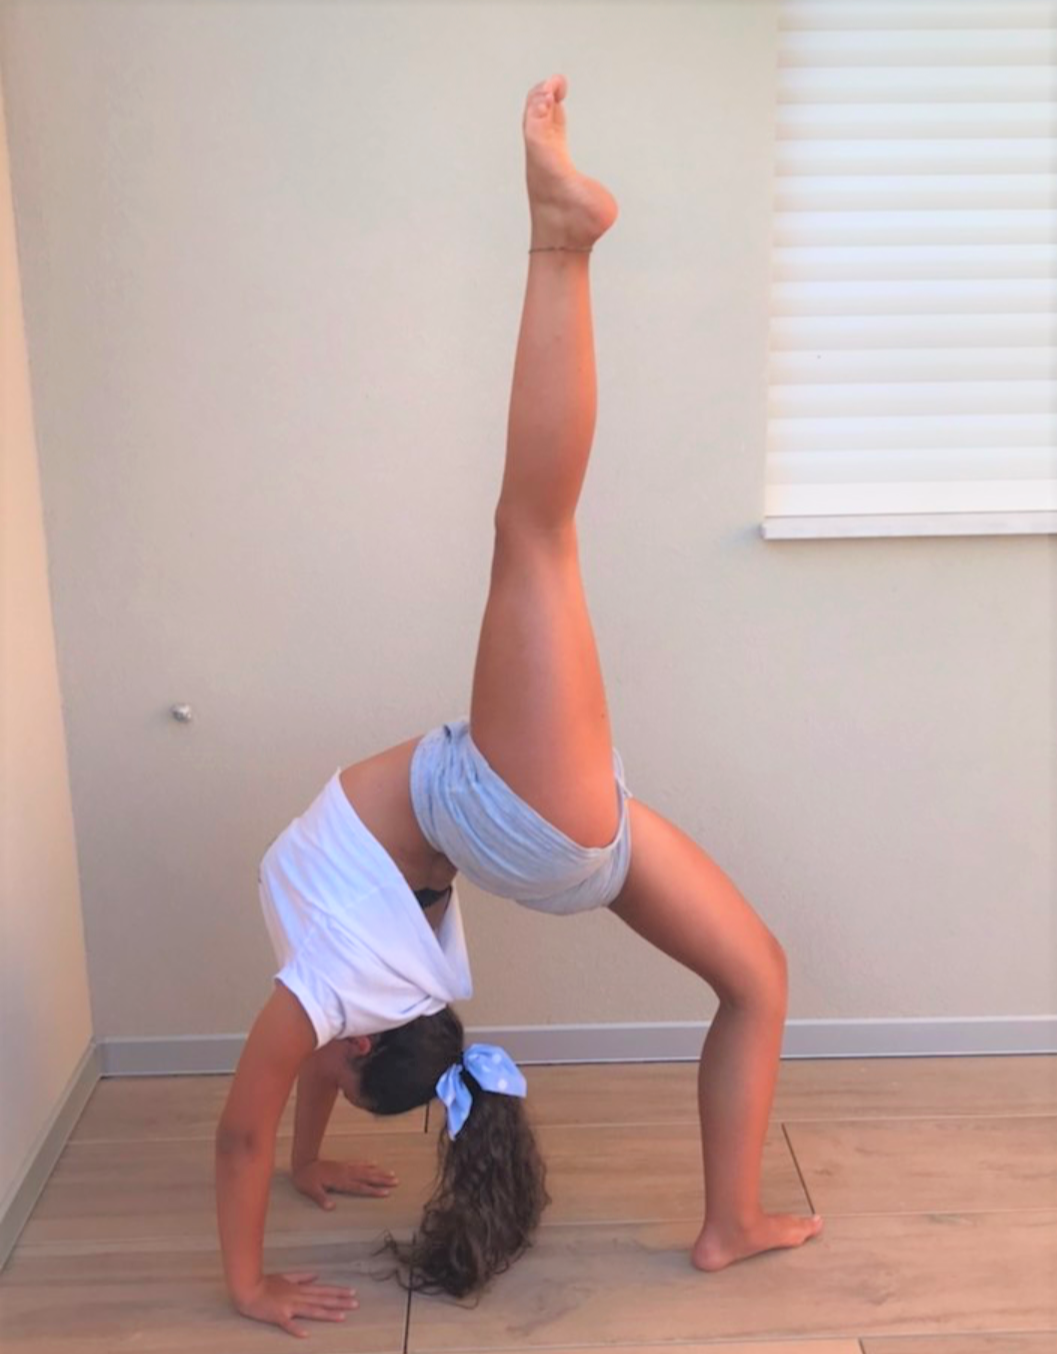 Girl in backbend with one leg extended straight up pointing at ceiling